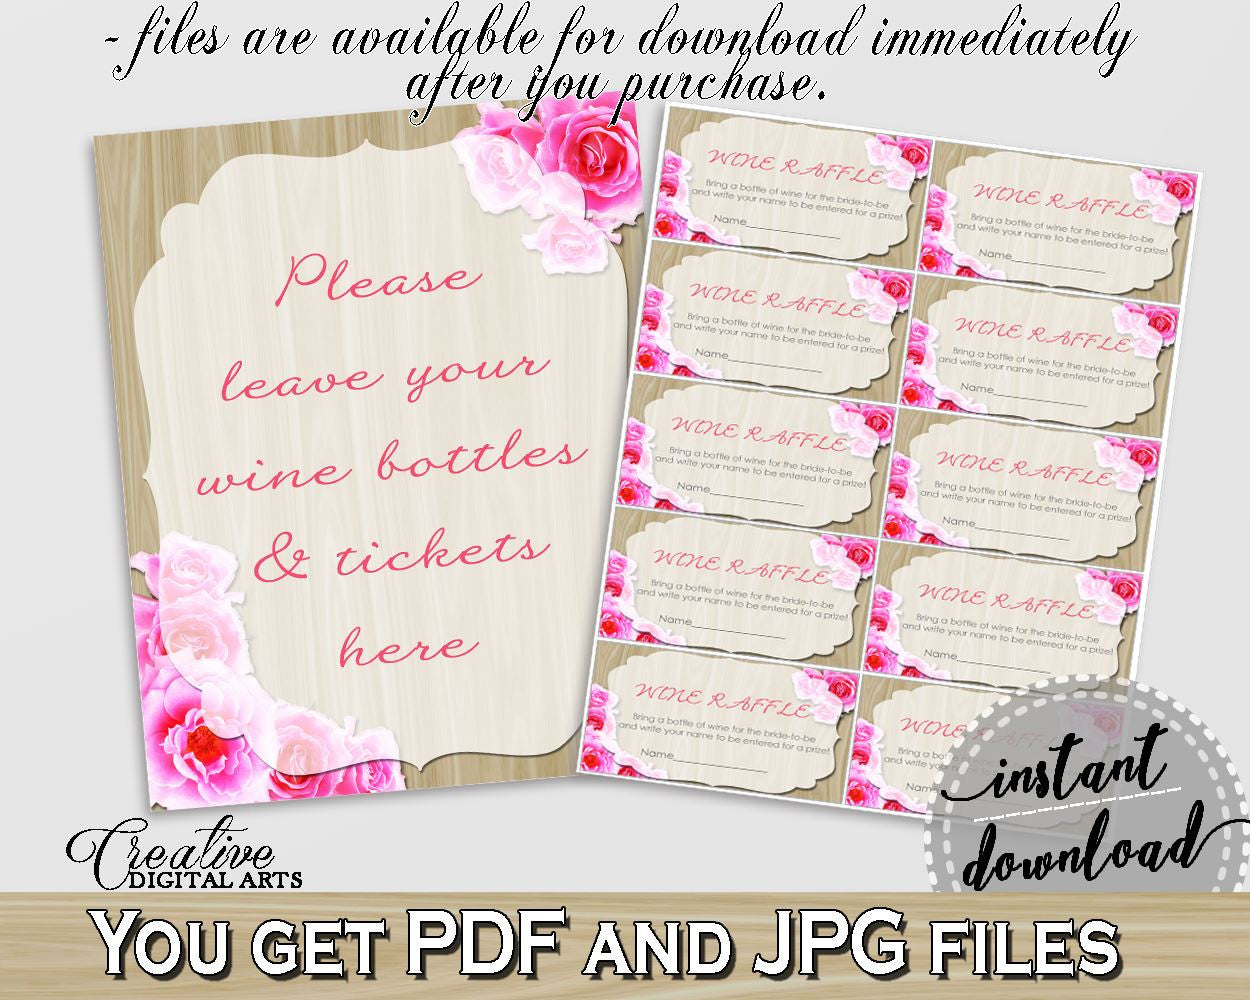 Wine Raffle in Roses On Wood Bridal Shower Pink And Beige Theme, wine party, light bridal shower, shower activity, paper supplies - B9MAI - Digital Product